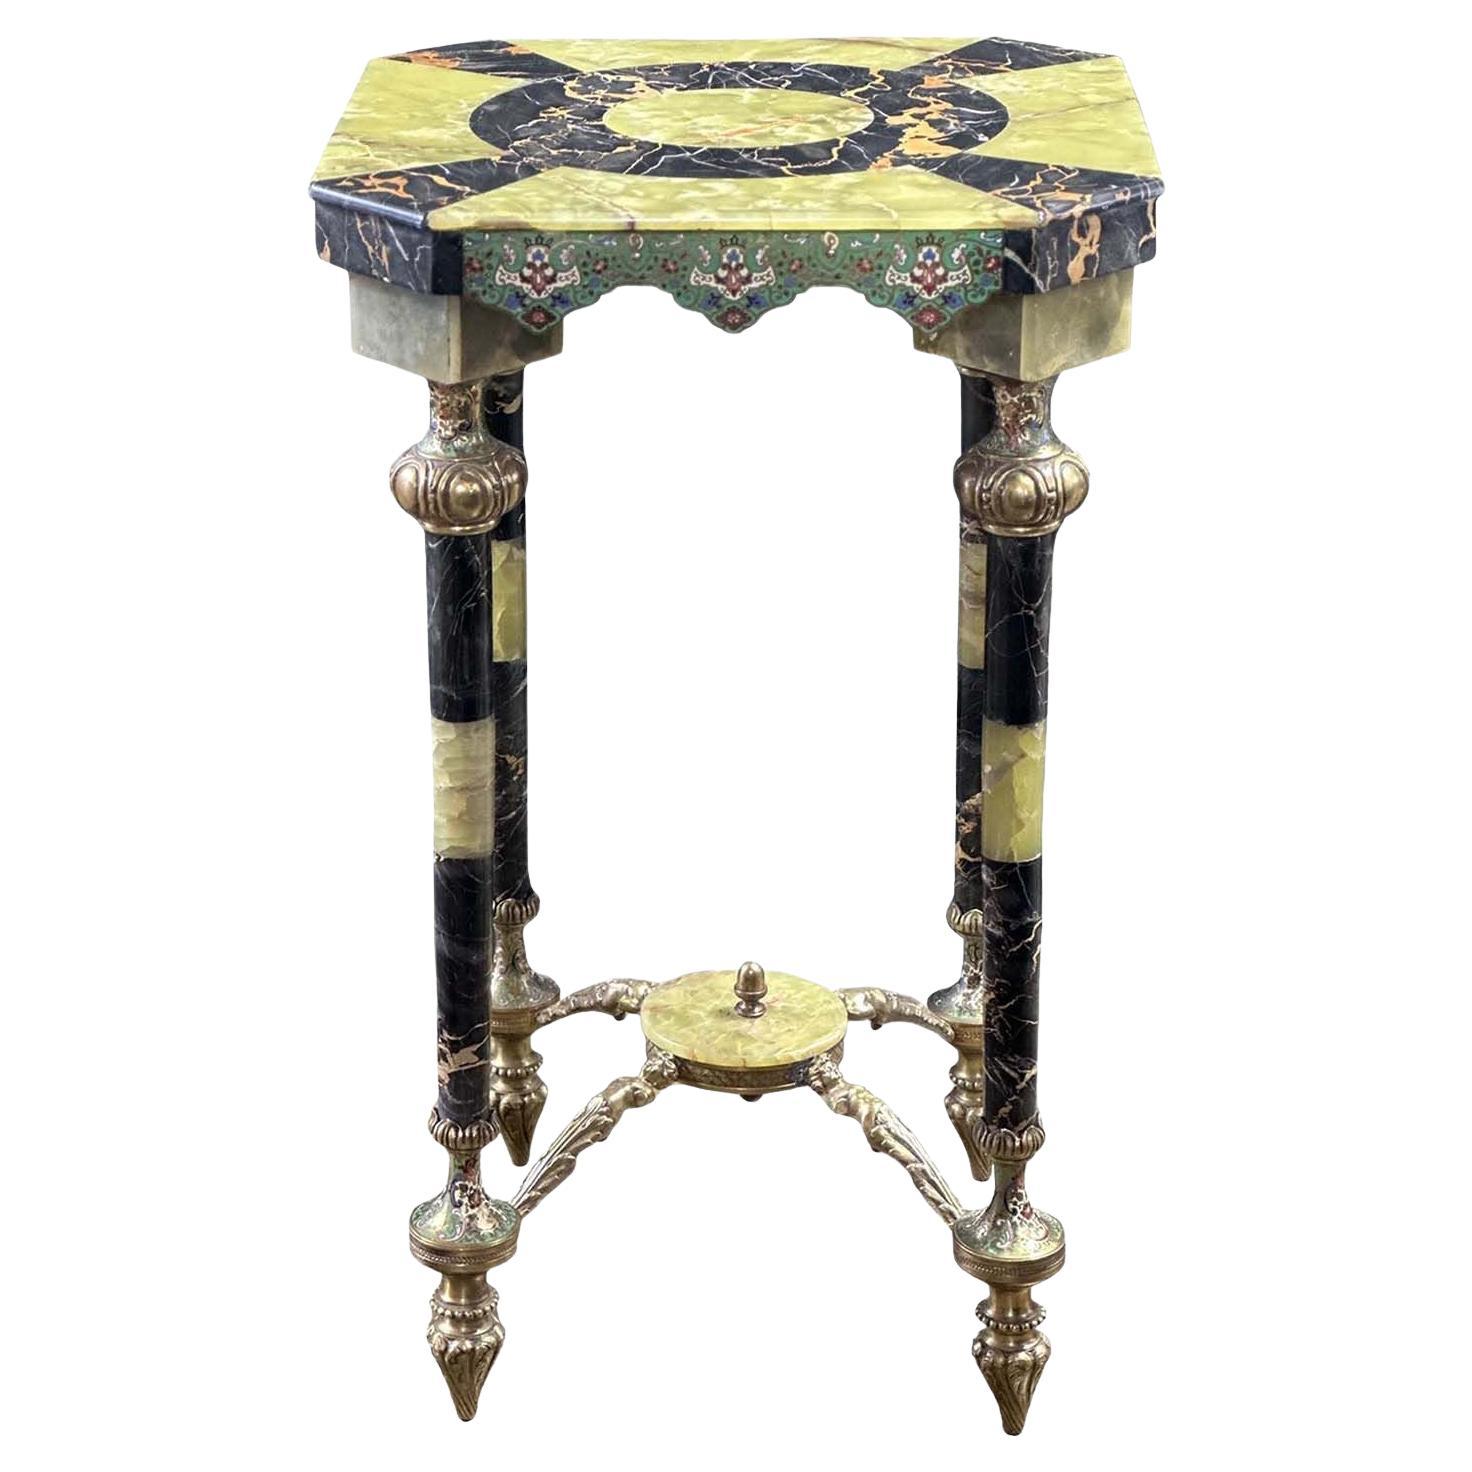 French Late 19th Century Onyx and Marble Cloisonné Side Table